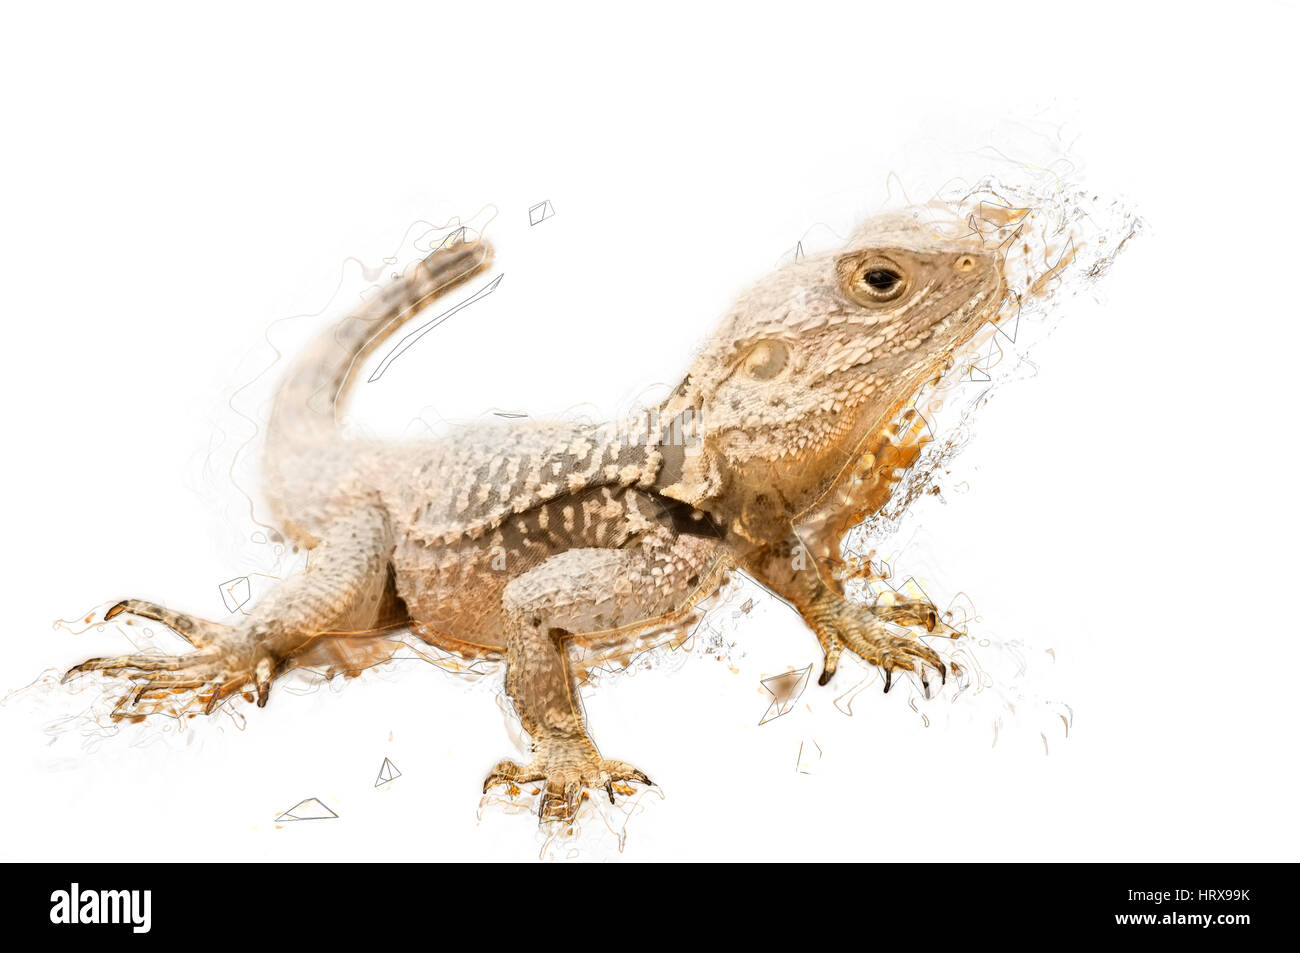 Sketch illustration of a lizard. Isolated. Contains clipping path Stock Photo